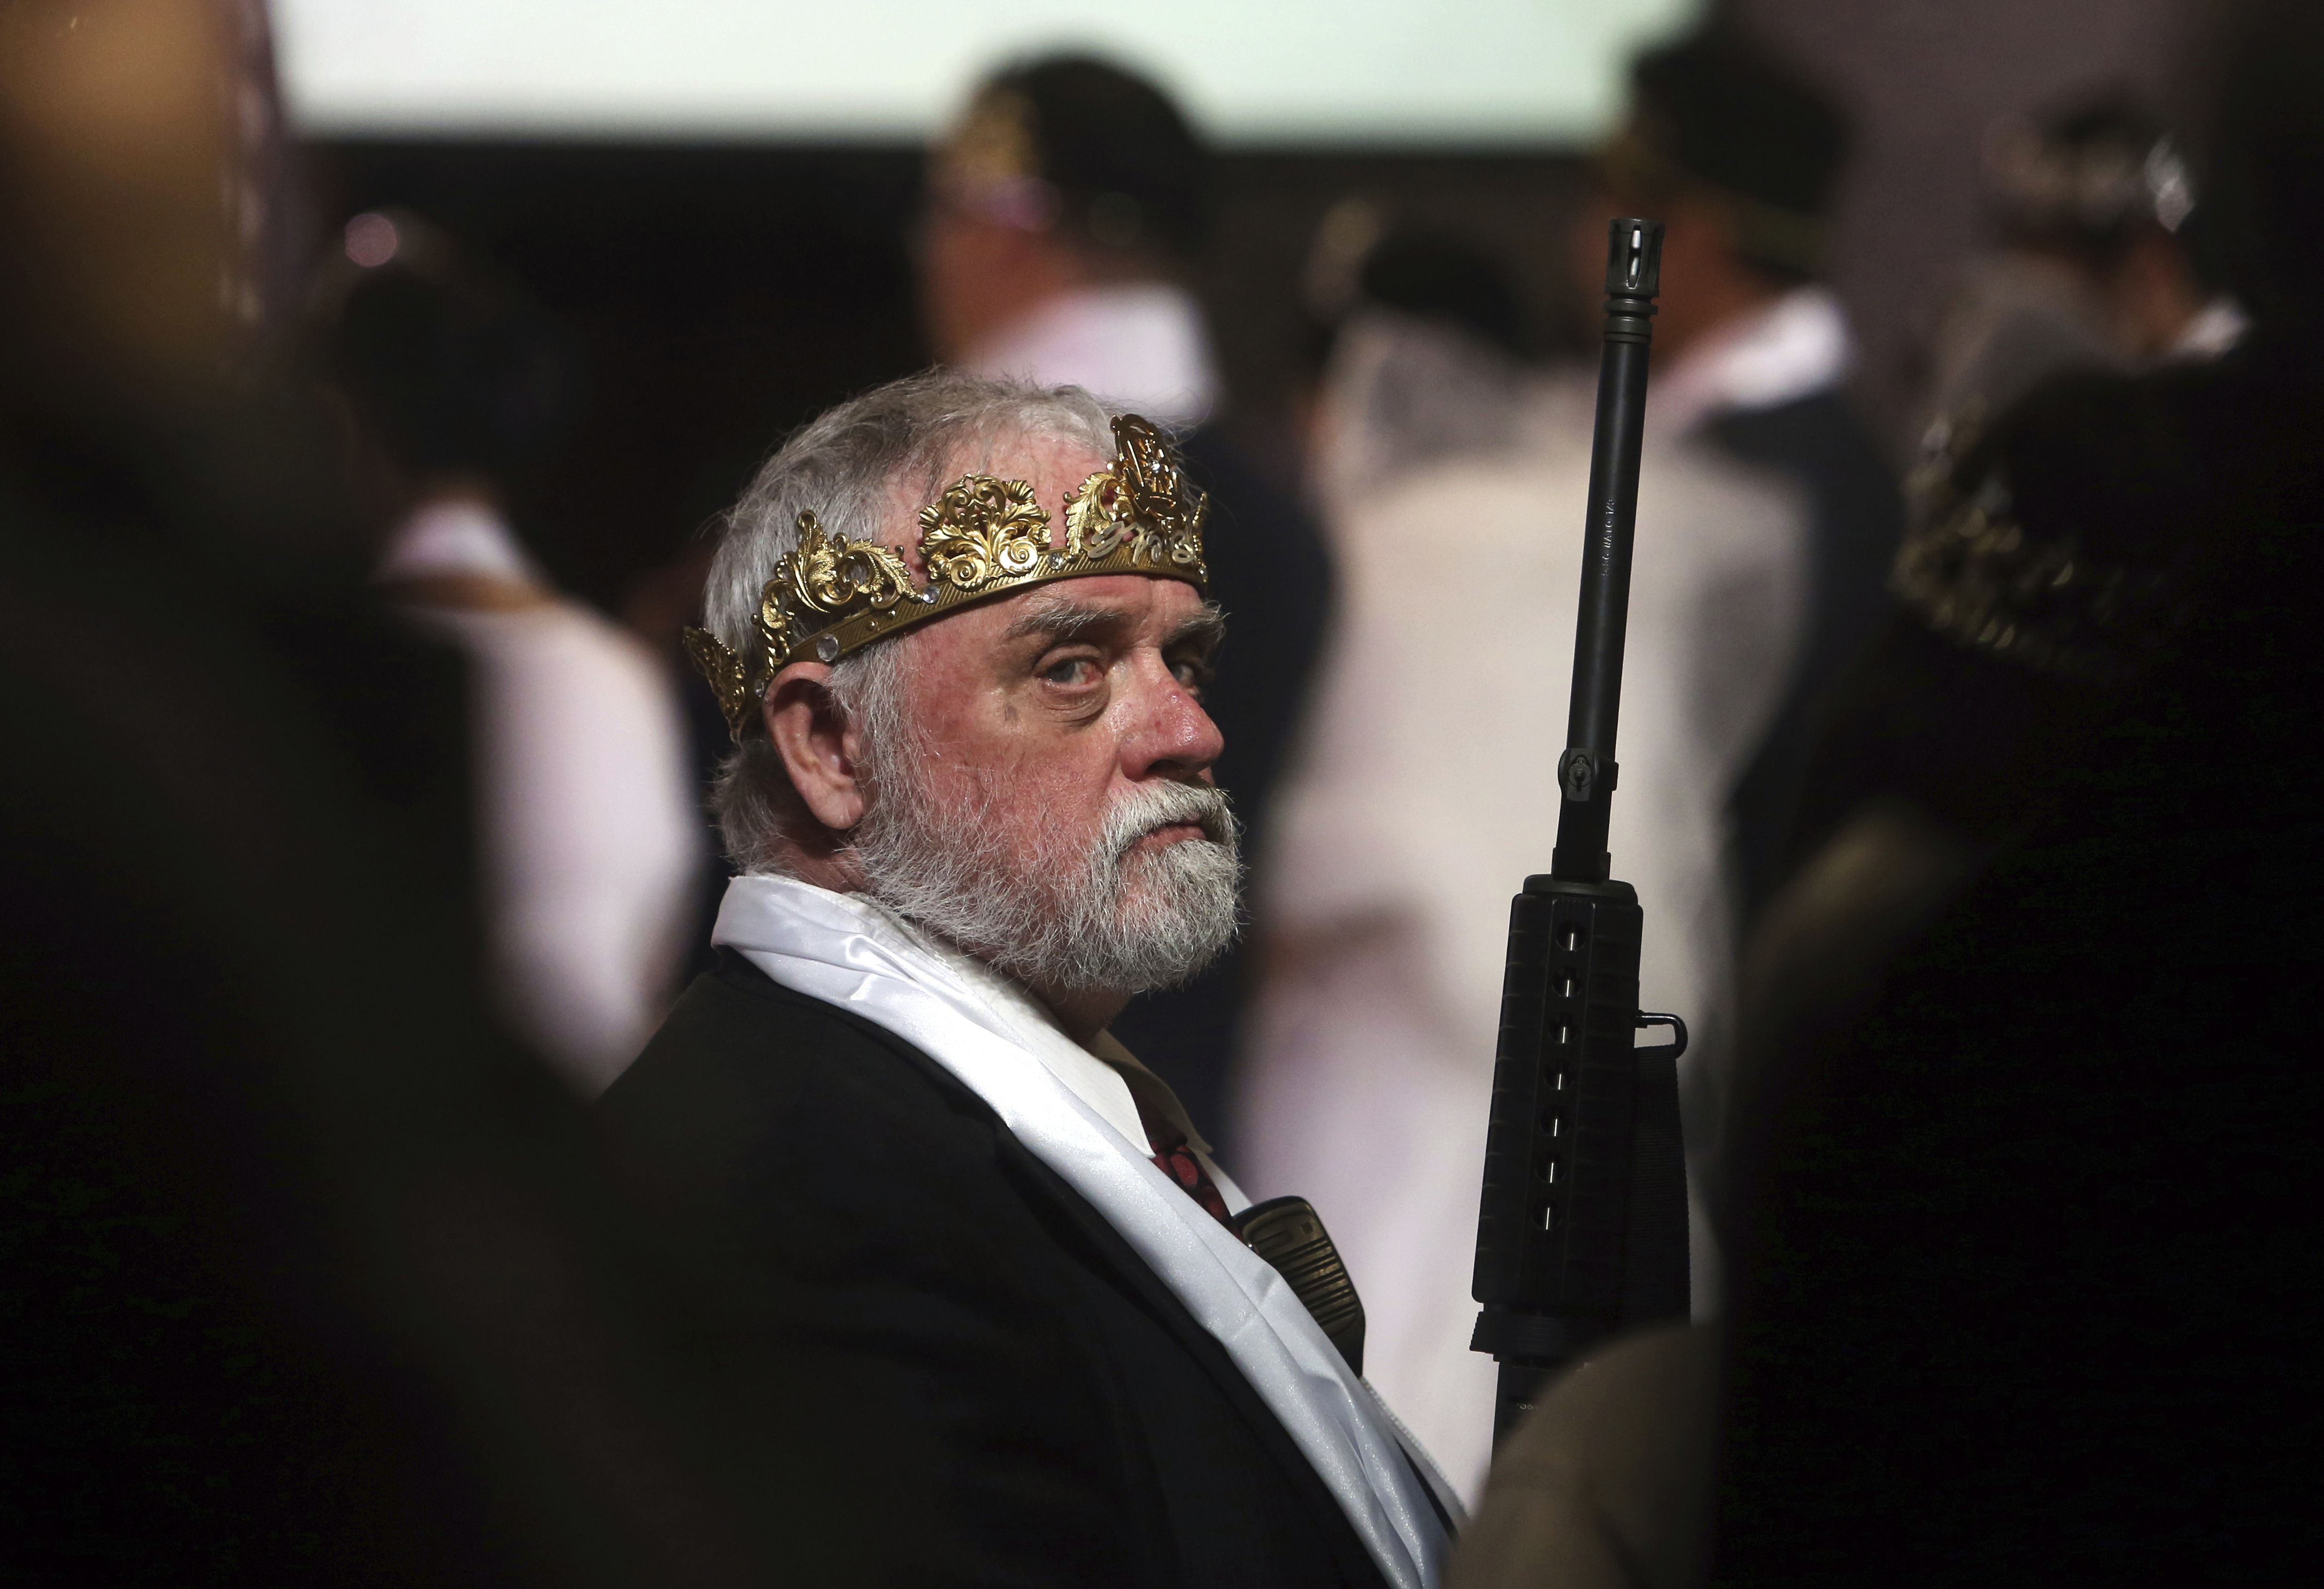 Man wears crown and holds rifle